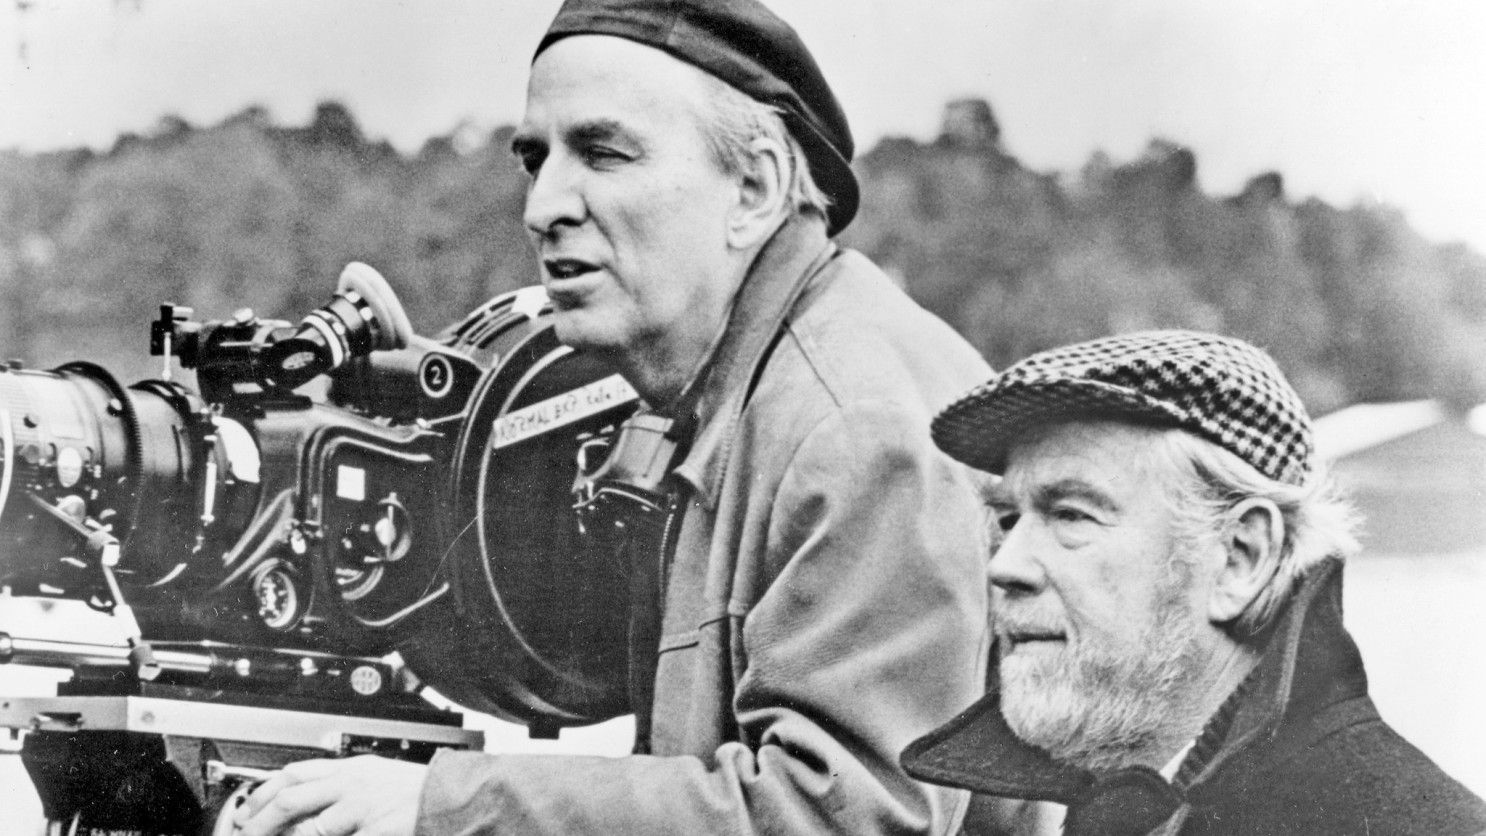 From the Archives: Ingmar Bergman, Cinema's Brooding Auteur Of the Psyche, Dies at 89 Angeles Times